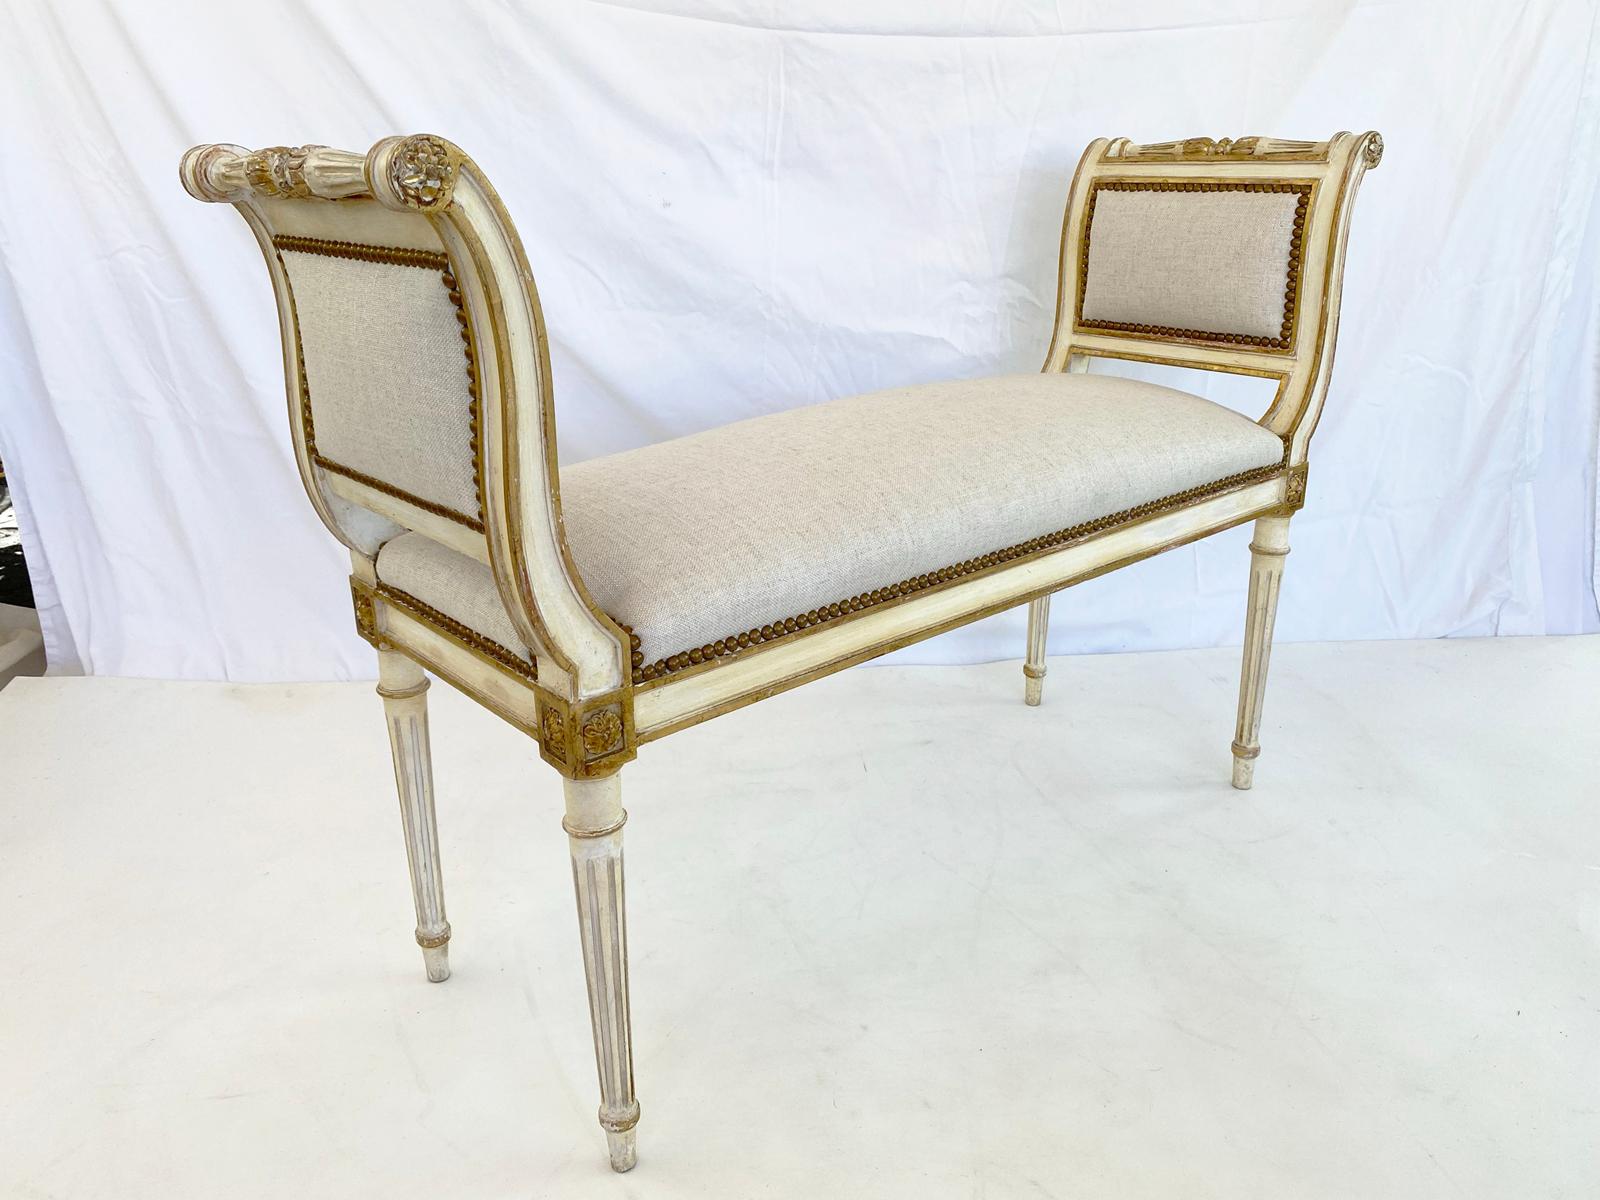 Window seat bench, painted and parcel gilt finish showing natural wear, having a fielded frame, with padded outscrolled arms finished with a rosette, and turned and reeded handle, padded seat, in linen, finished with nailheads, raised on round,